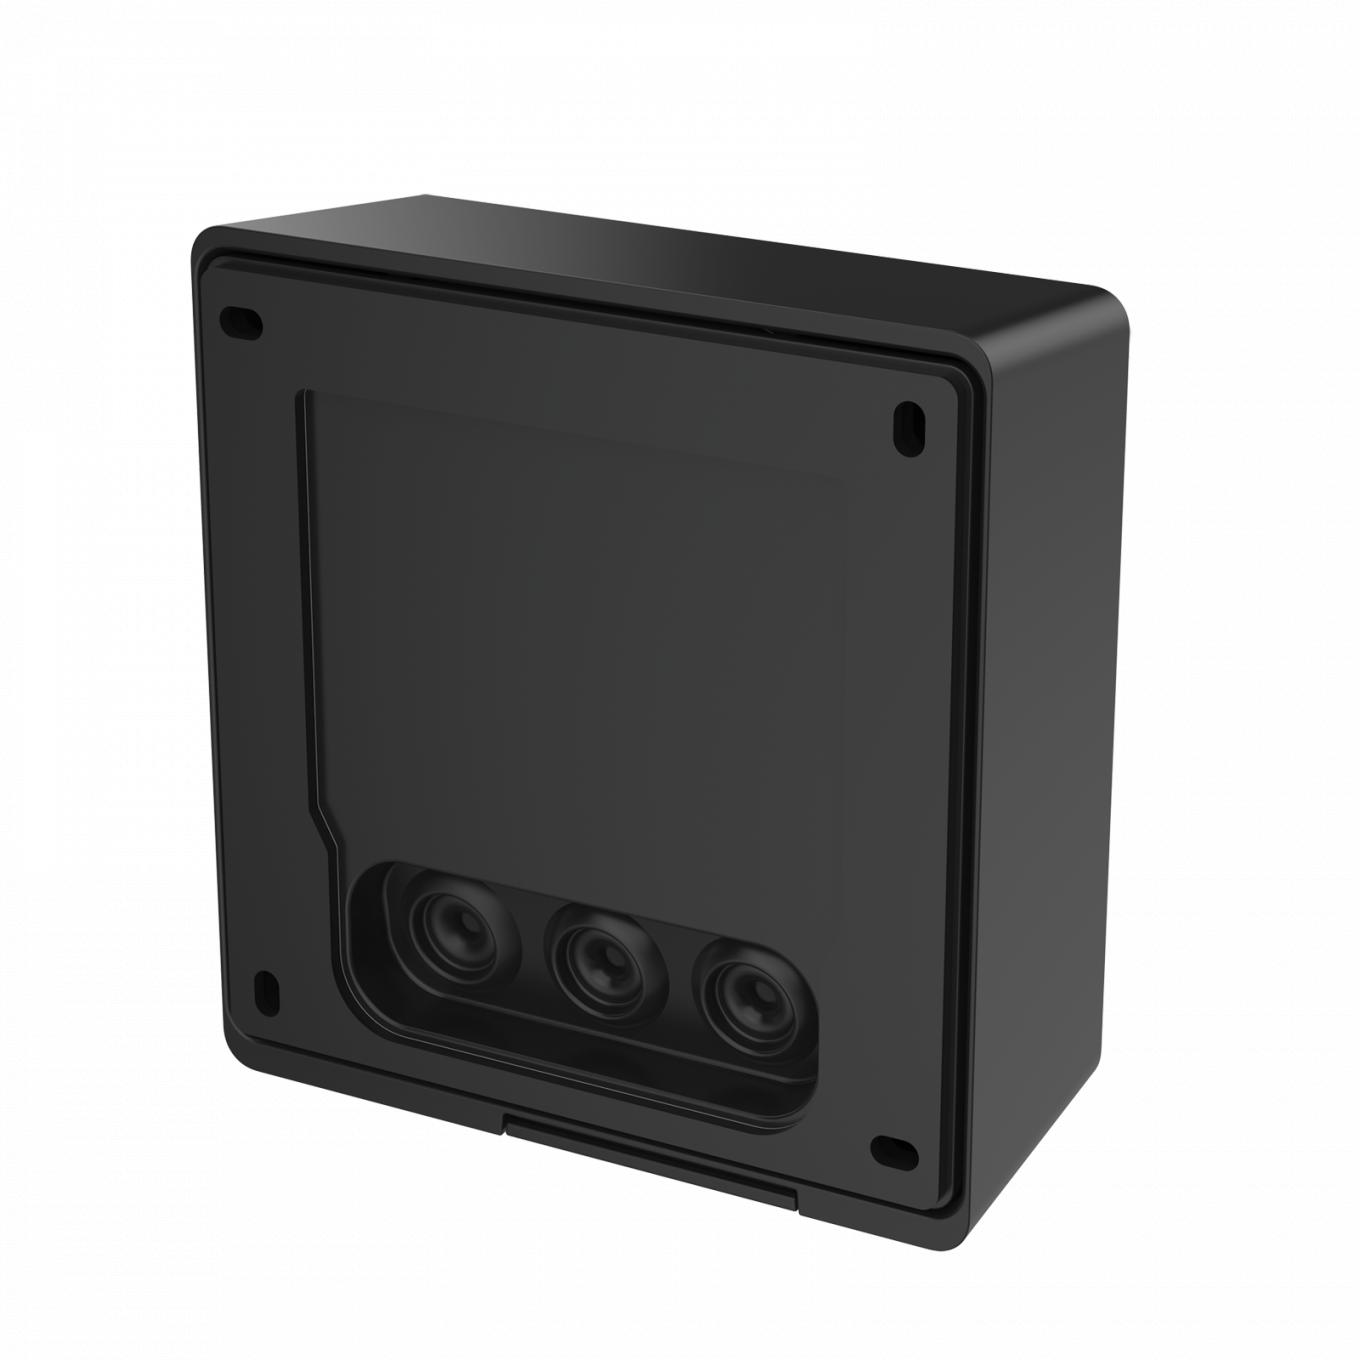 AXIS TI8602 Wall Mount | Axis Communications